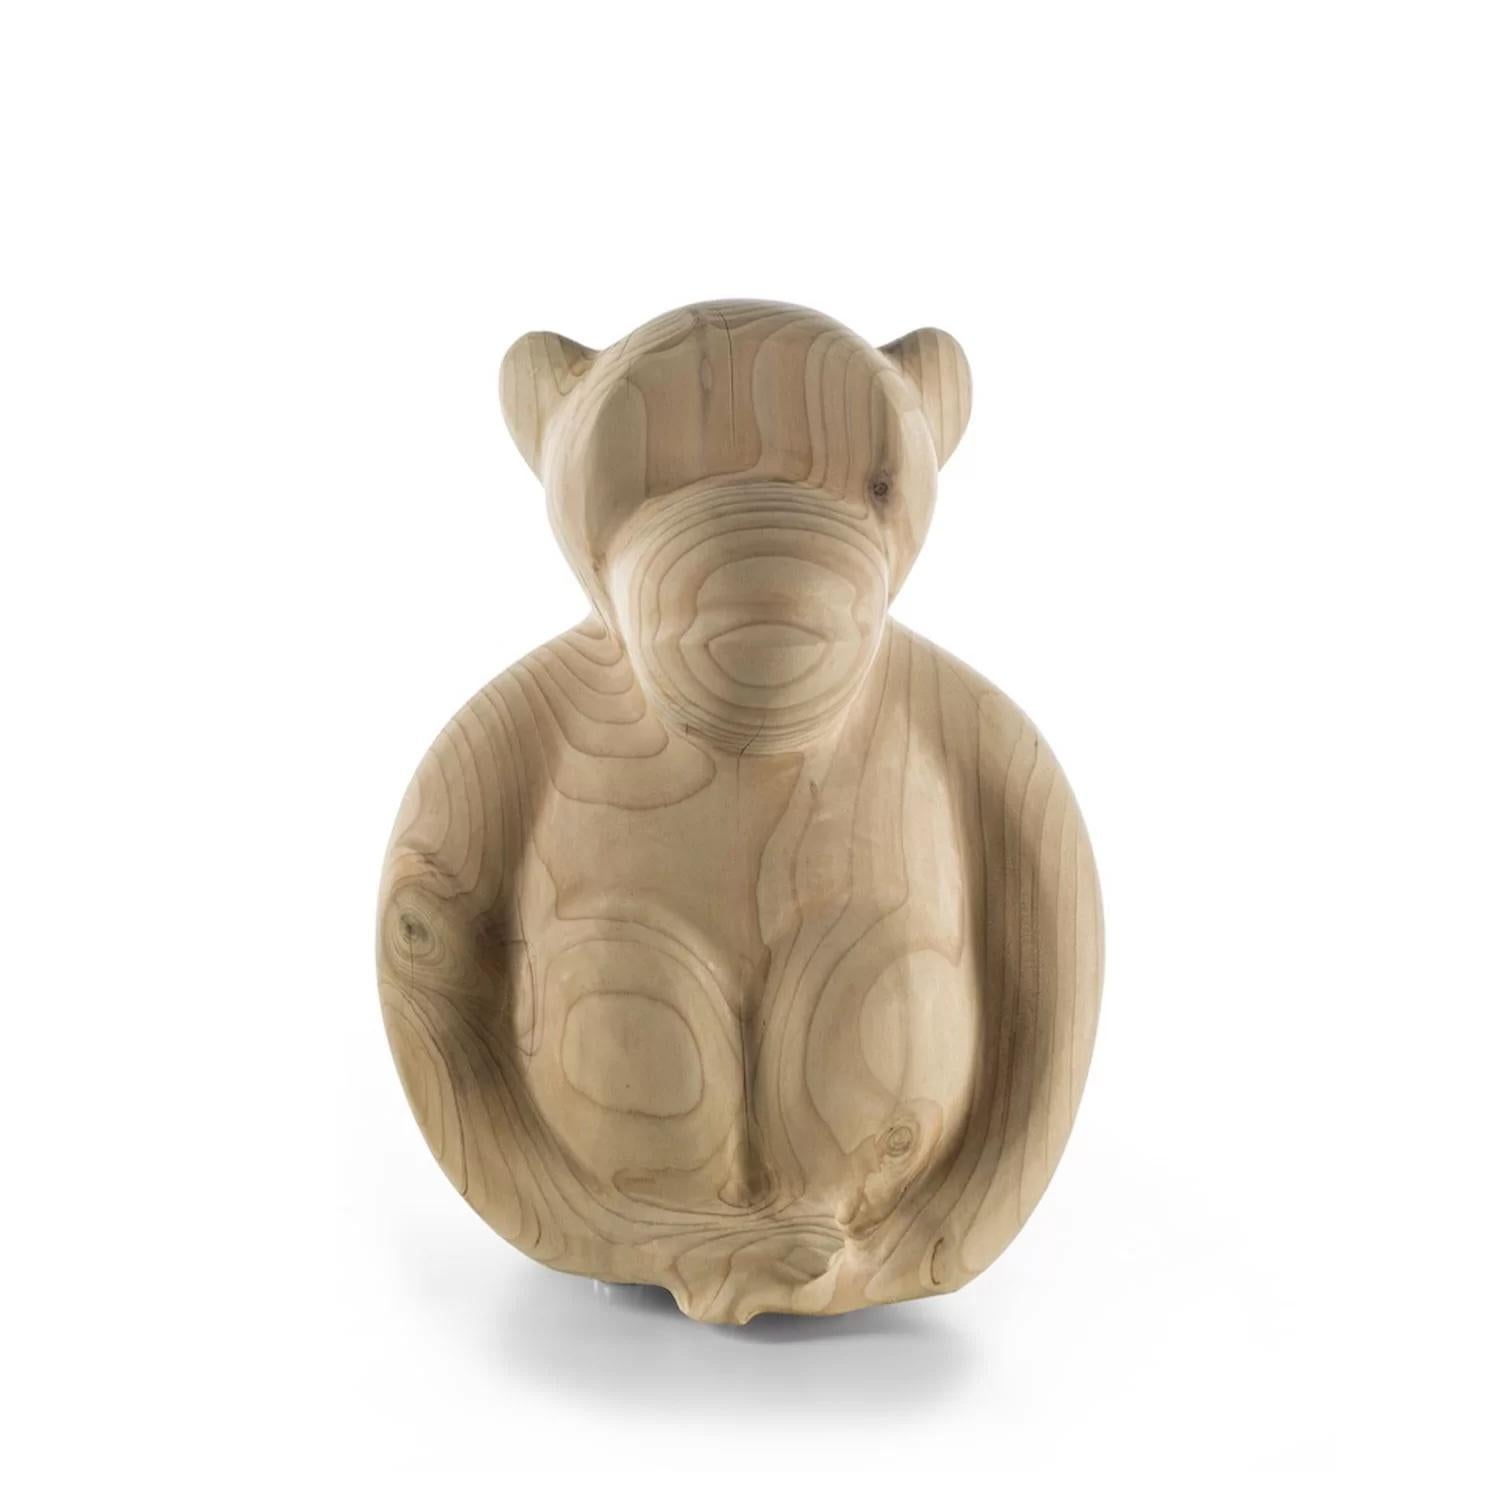 Solid wood accessory in scented Cedar made from one single block of wood, with a sculptural design inspired by a funny little monkey. Available in three sizes: big, medium and small

